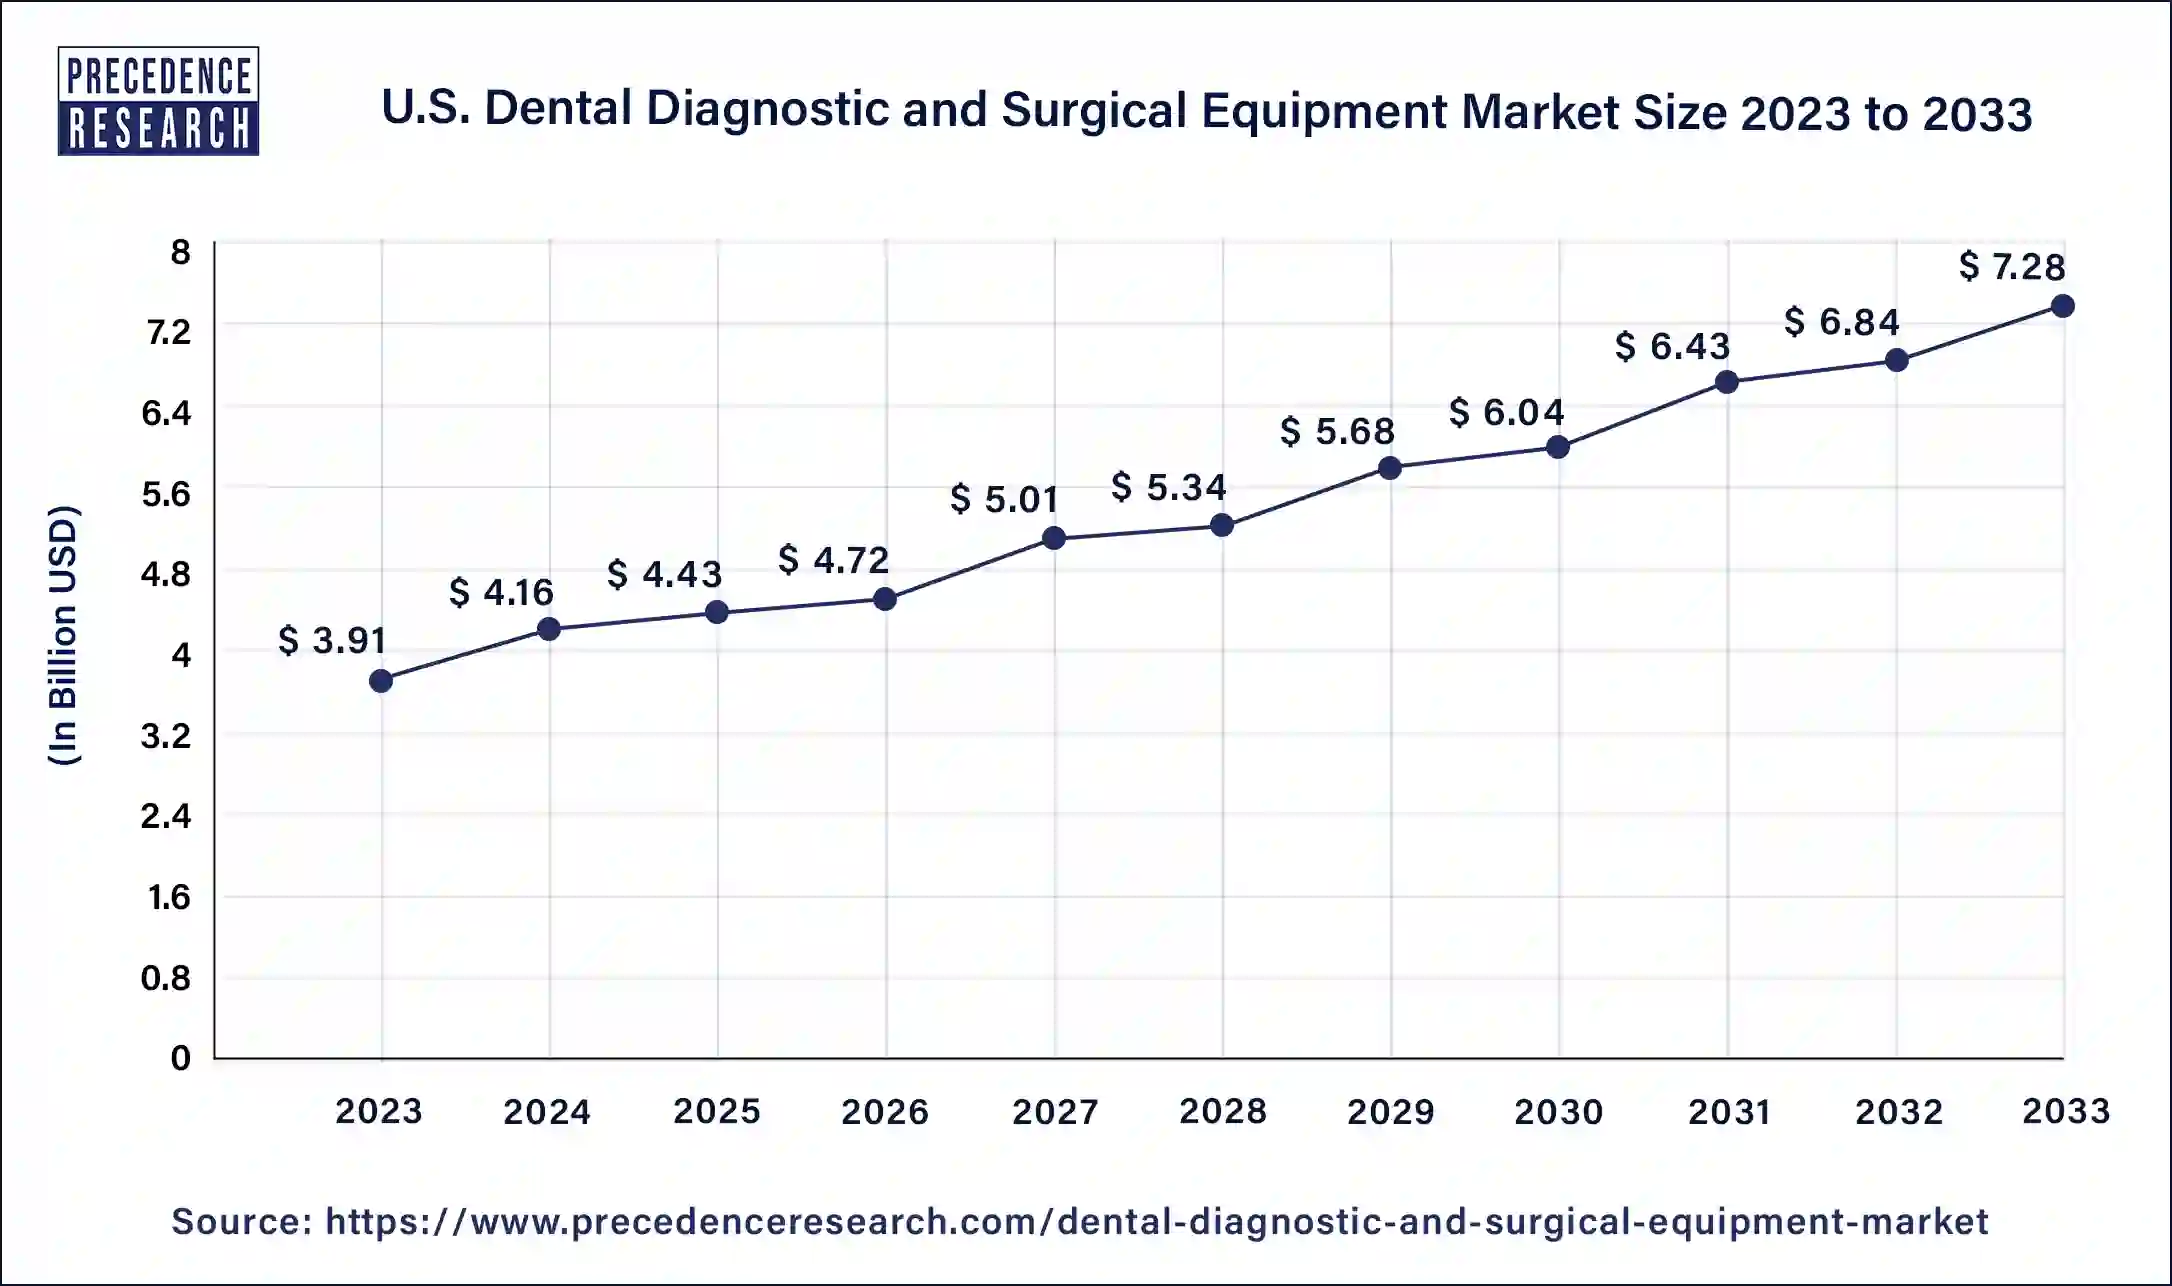 U.S. Dental Diagnostic and Surgical Equipment Market Size 2024 to 2033